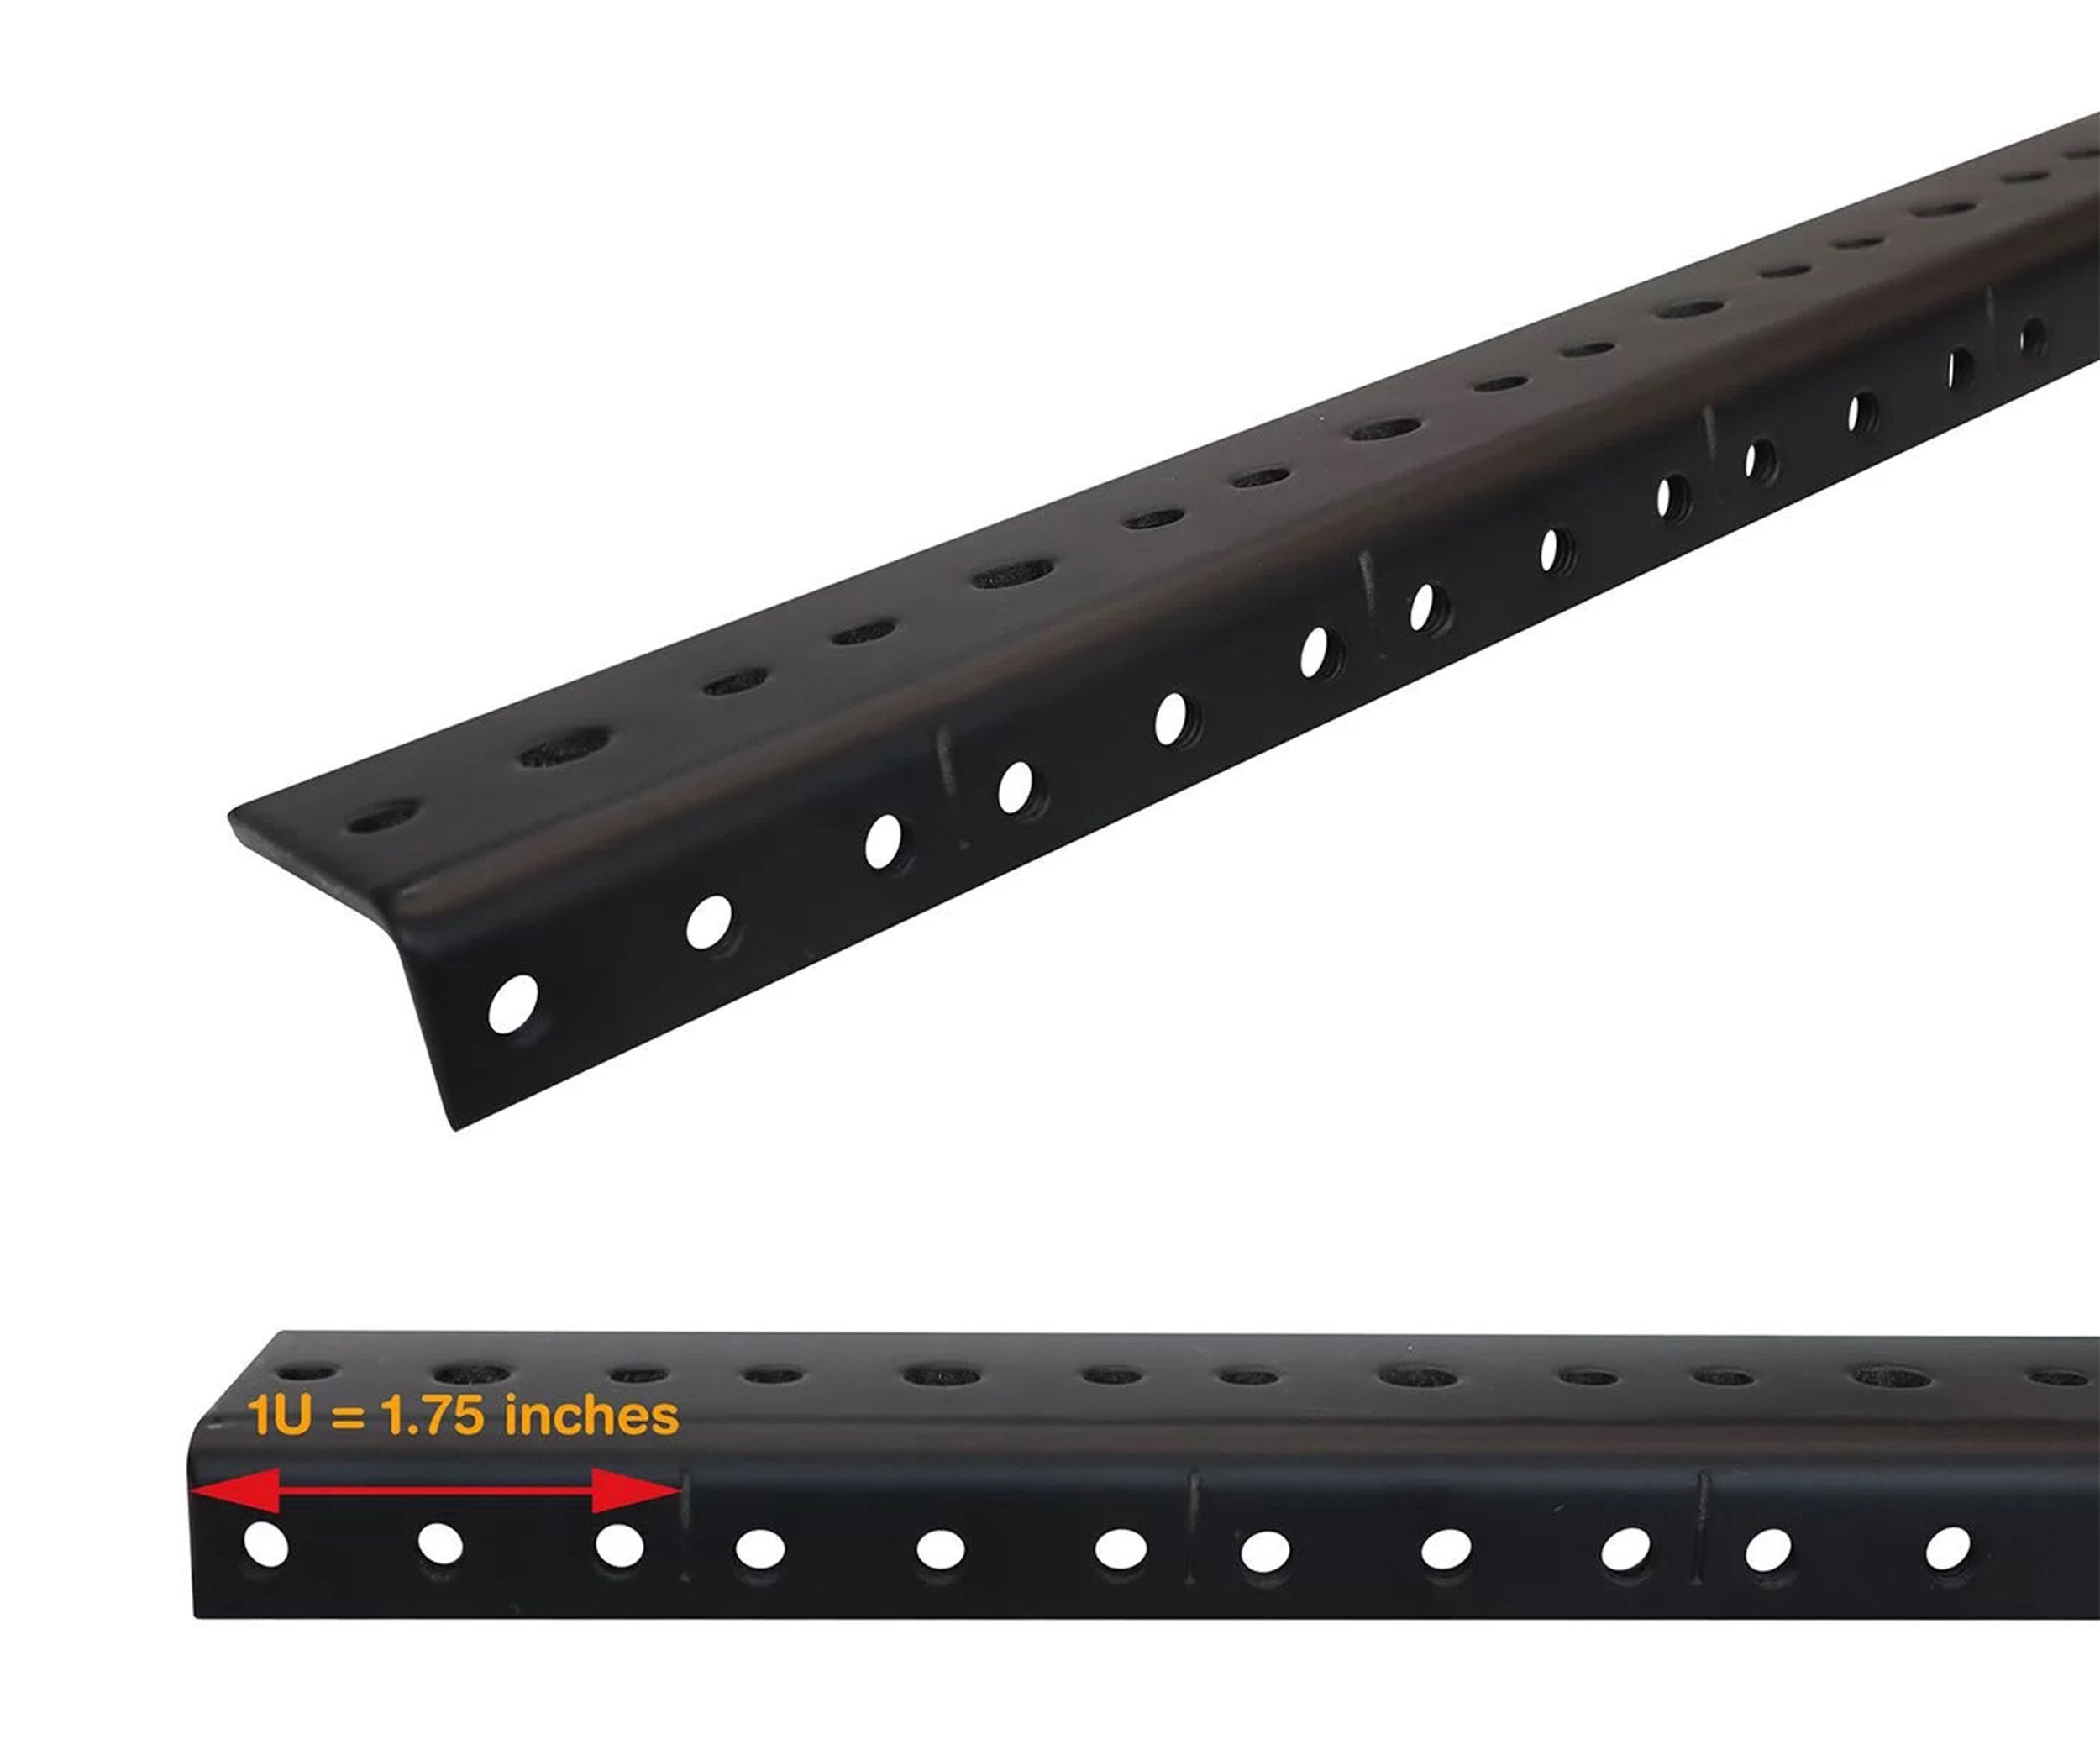 Odyssey ARR20 Pair of Pre-Tapped Rack Rails 20U - 35 Inches - Hollywood DJ